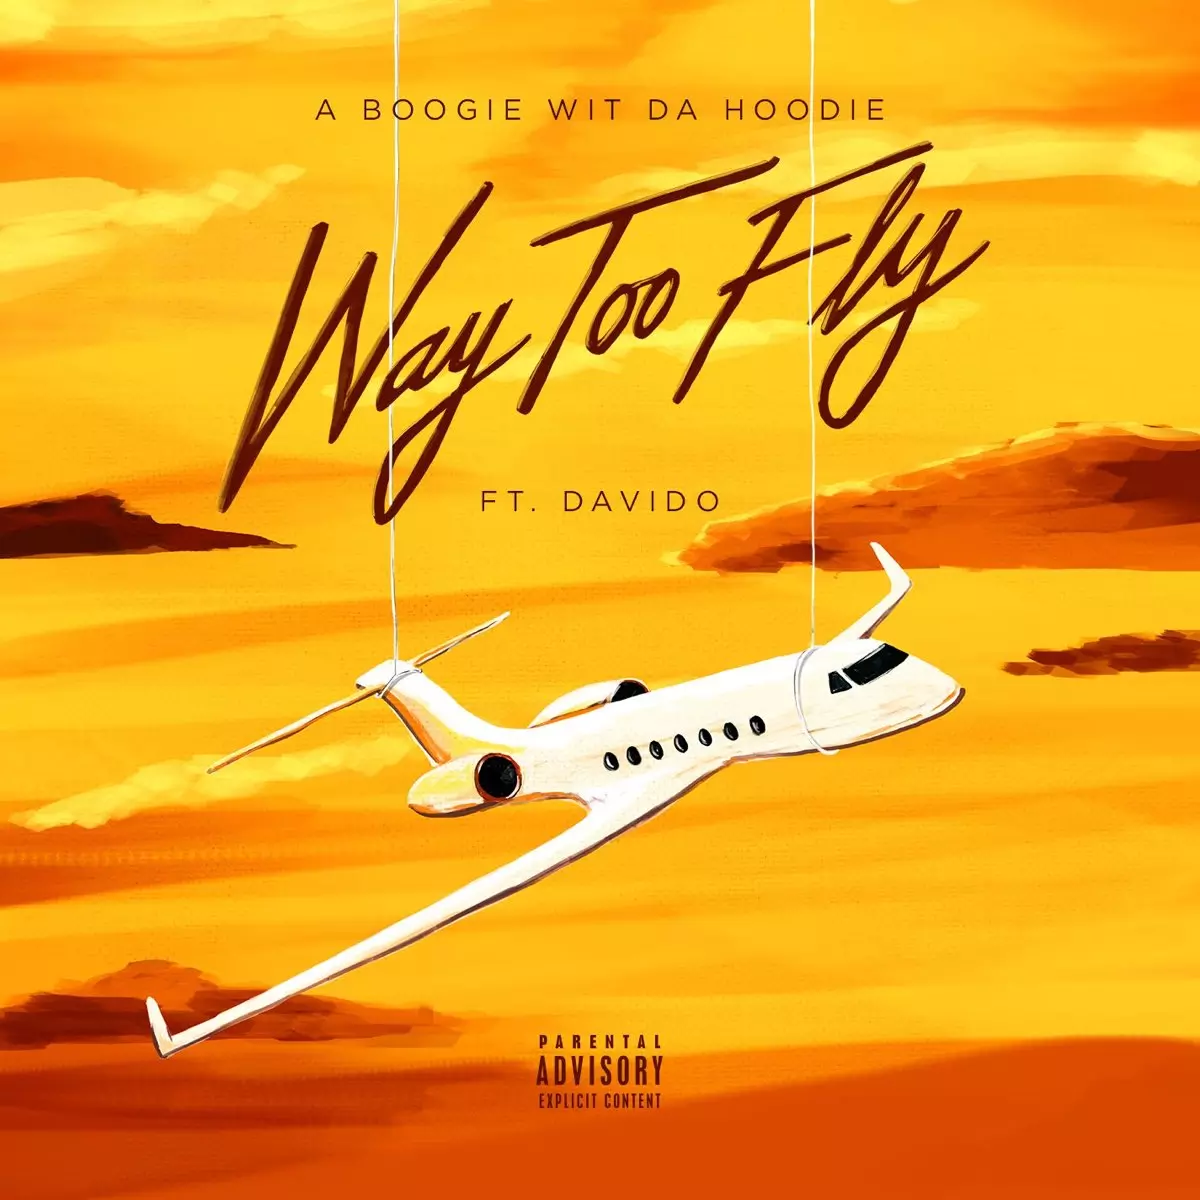 Way Too Fly (feat. Davido) - Single by A Boogie wit da Hoodie on Apple Music